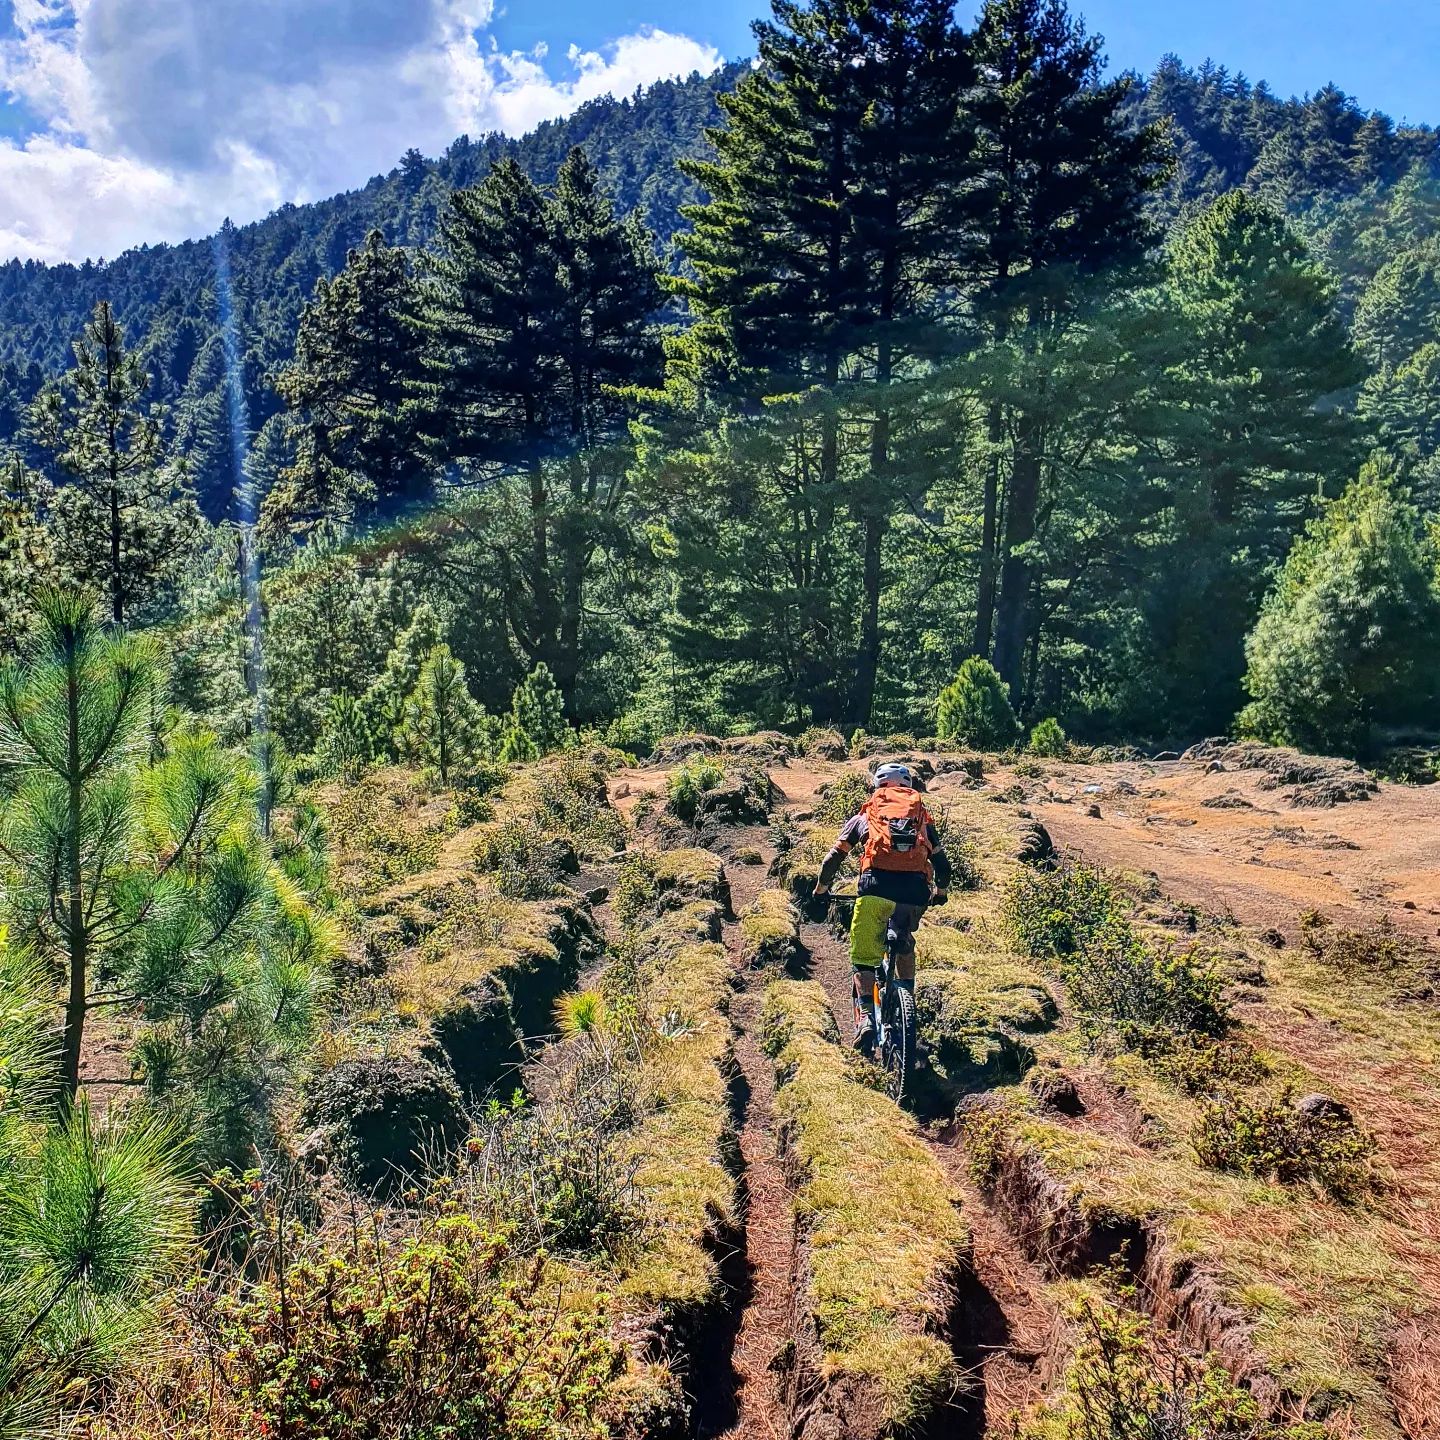 Highland tour is in full swing! We are connecting the dots crossing the country on ancient trails 👍🌄
.
#mtbtravel #mtbtours #visitguatemala #goride #enduromtb #explore #guate #totonicapan #guatemala🇬🇹 #outside #mtbfam #adventuretime #adventuremtb #outside #biketour